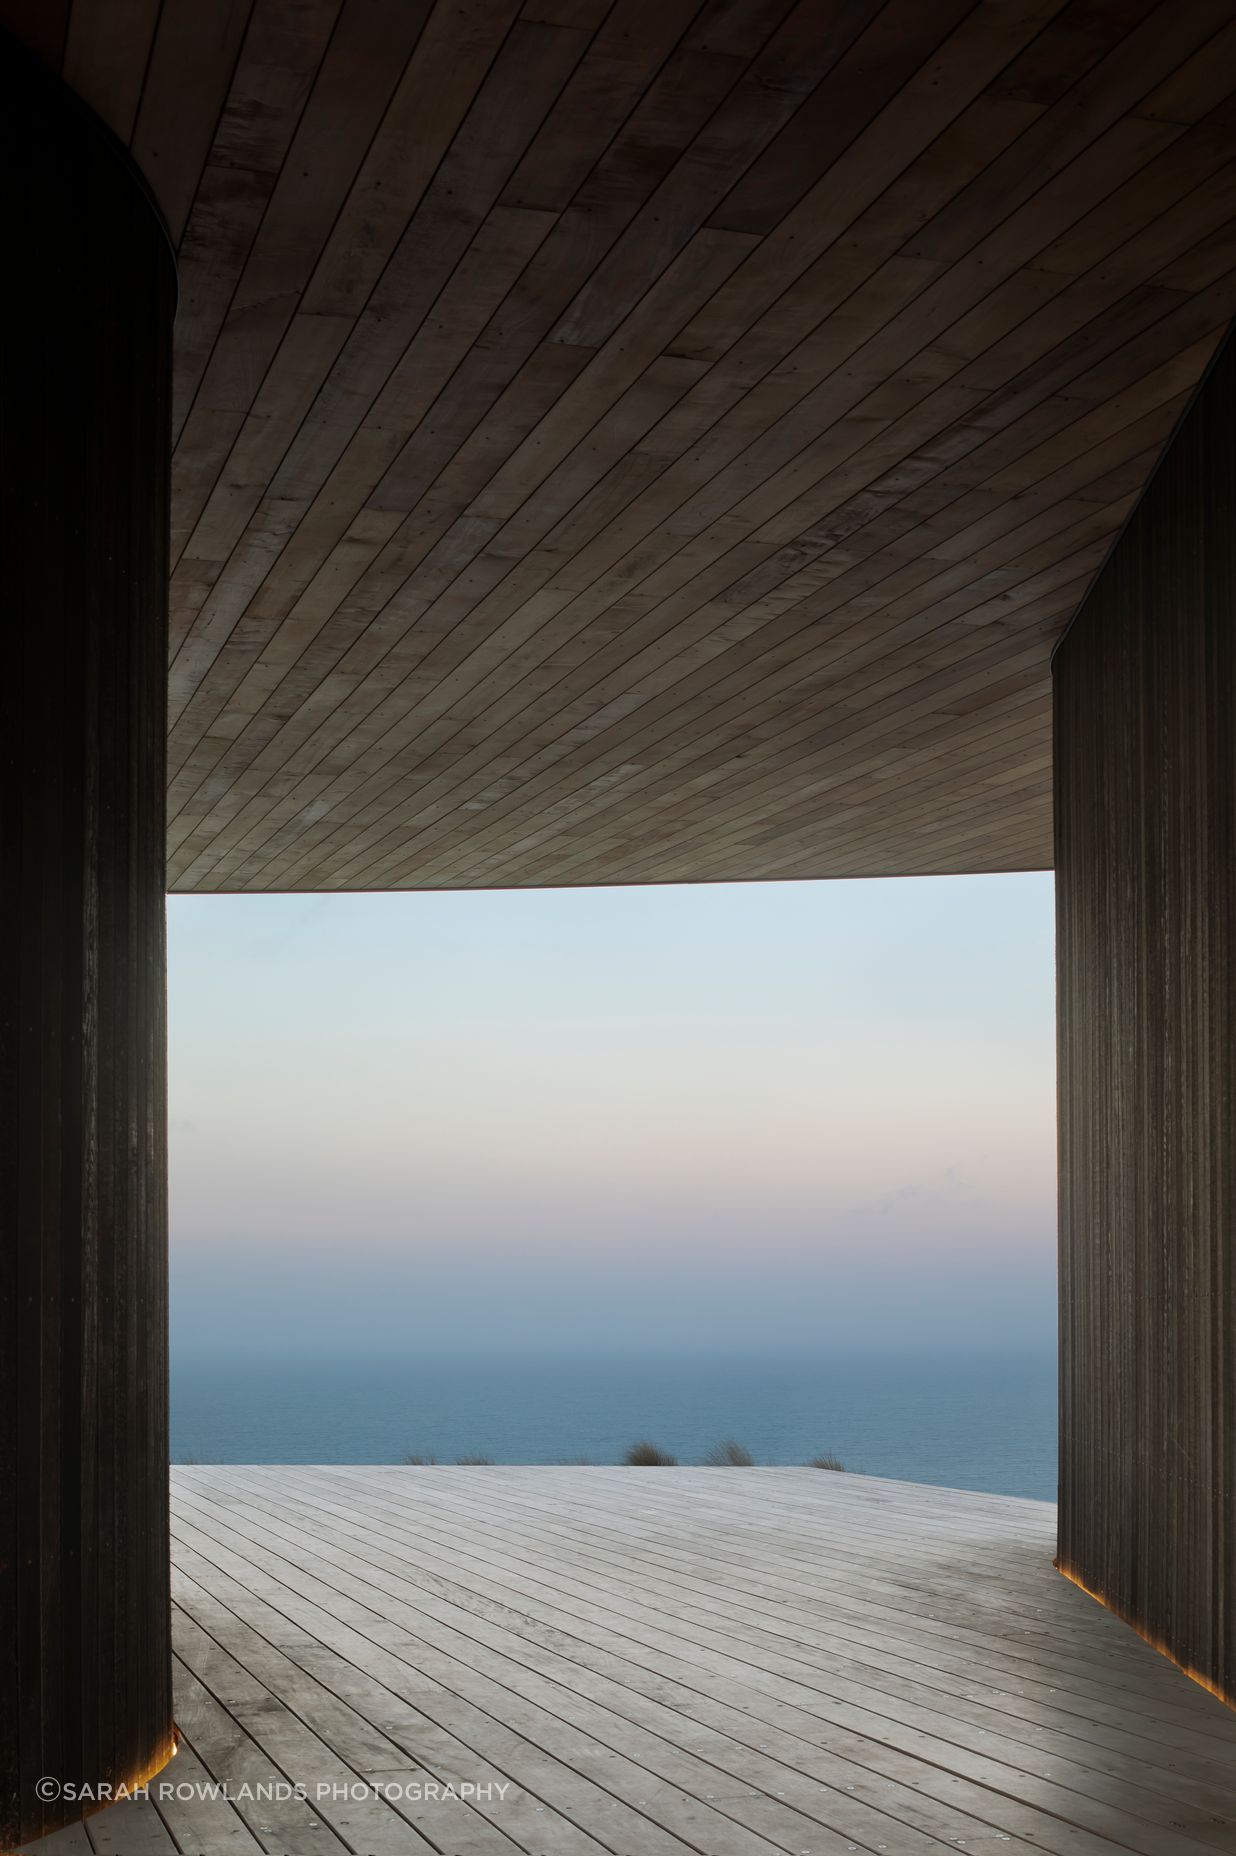 A dreamy view of the mist is captured from the breezeway between the house and garage pods.